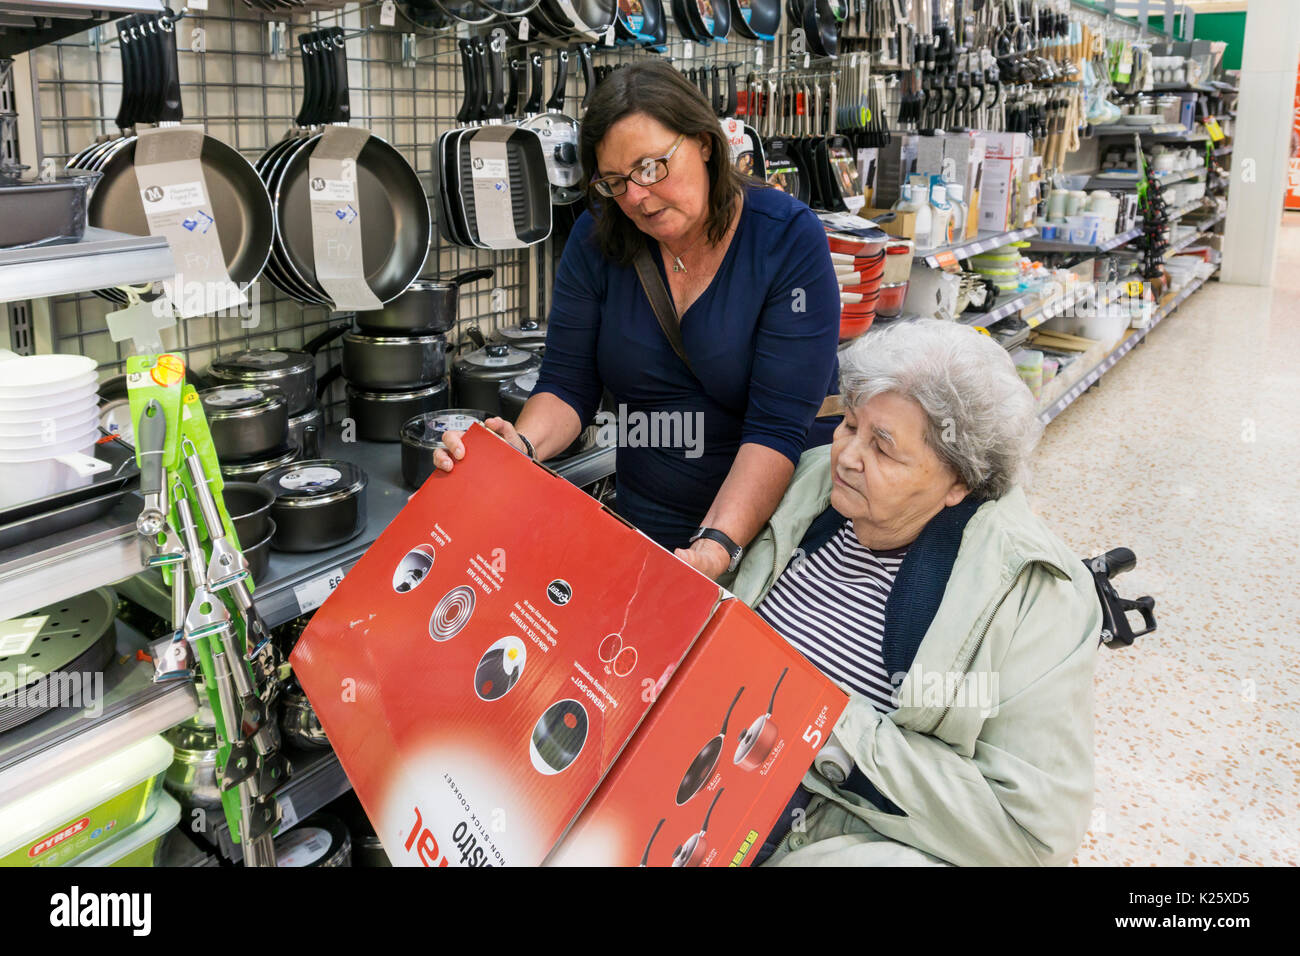 Carer or assistant helping an elderly woman in a wheelchair choose some new saucepans in a supermarket. Stock Photo